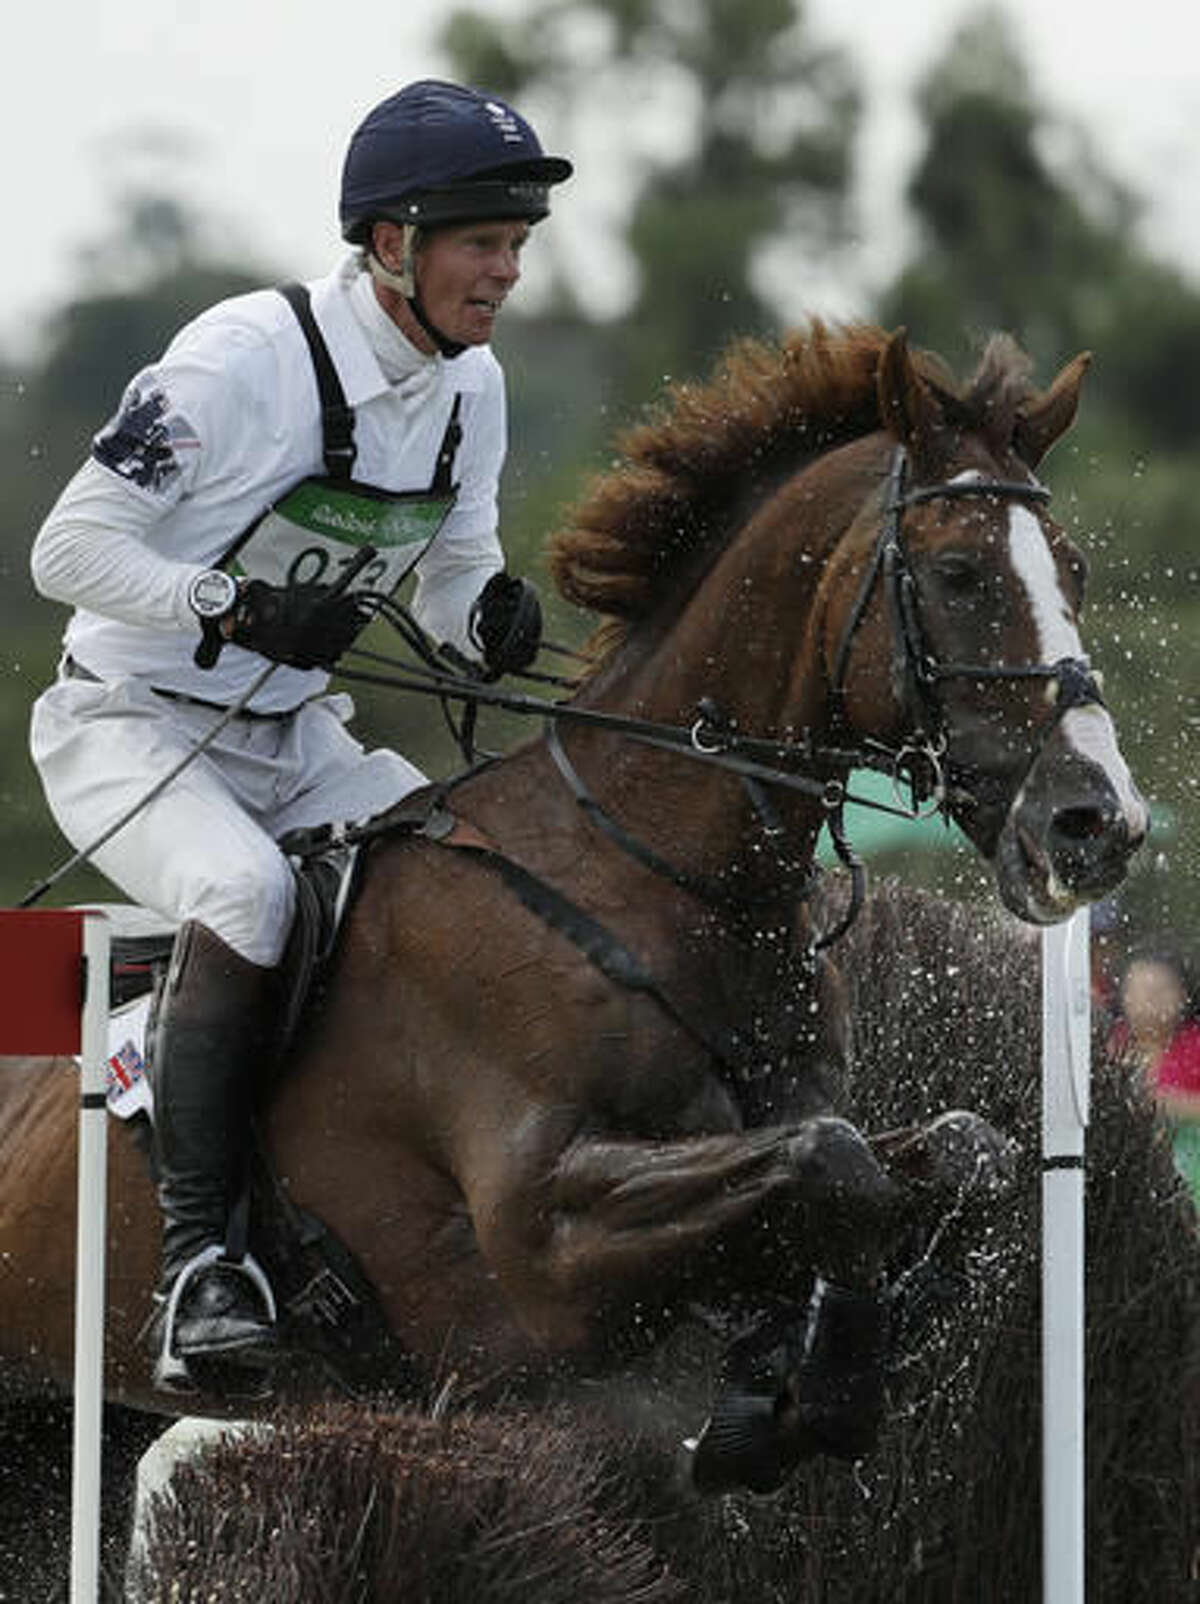 William Fox-Pitt, of Great Britain, competes on Chilli Morning in the equestrian eventing cross country phase at the 2016 Summer Olympics in Rio de Janeiro, Brazil, Monday, Aug. 8, 2016. (AP Photo/John Locher)